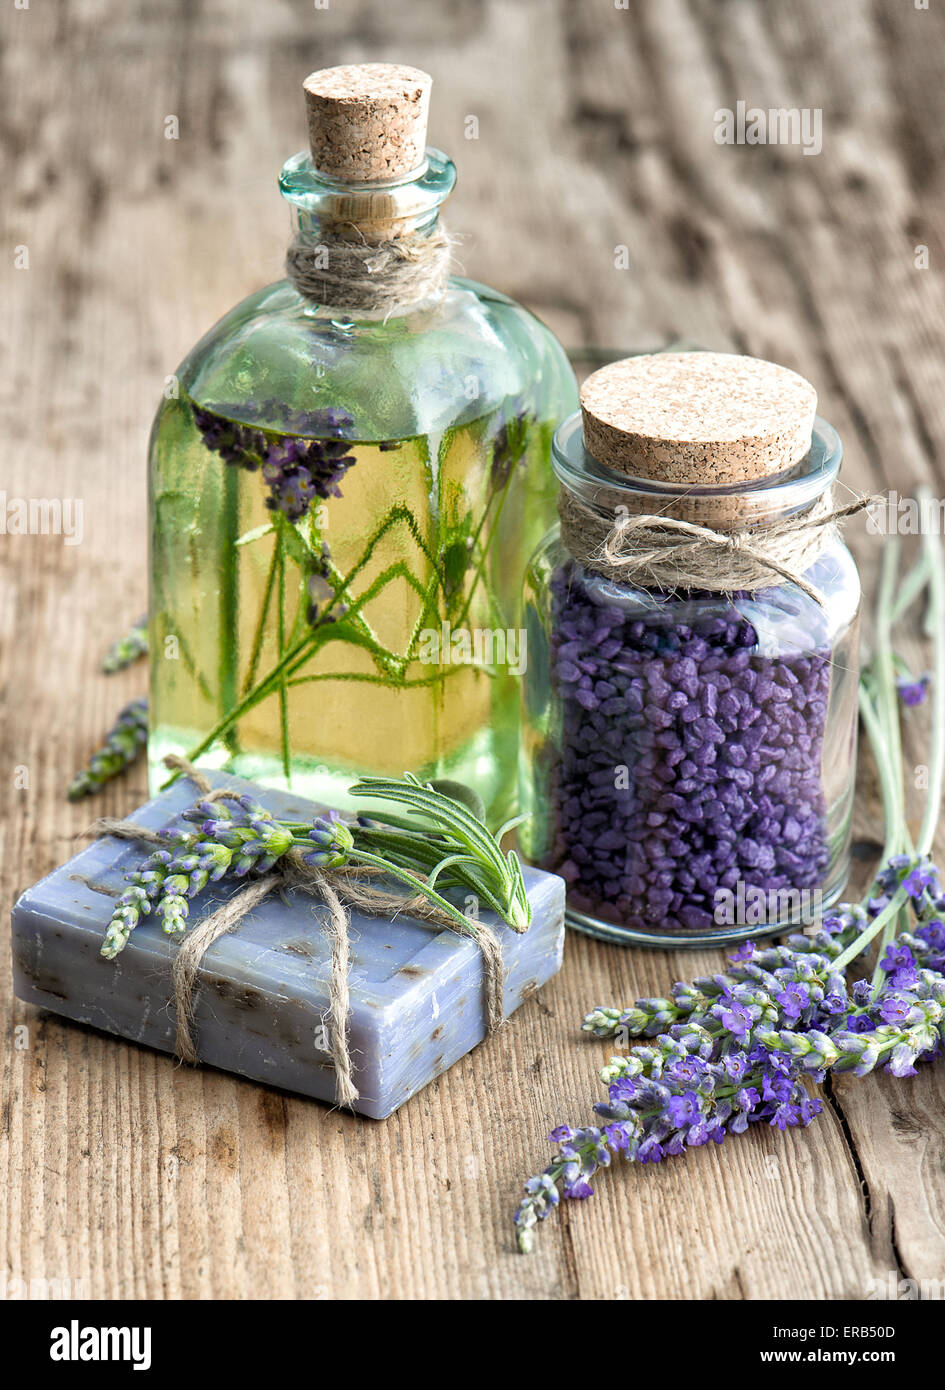 Lavender essential oil, herbal soap and bath salt with fresh flowers on wooden background Stock Photo